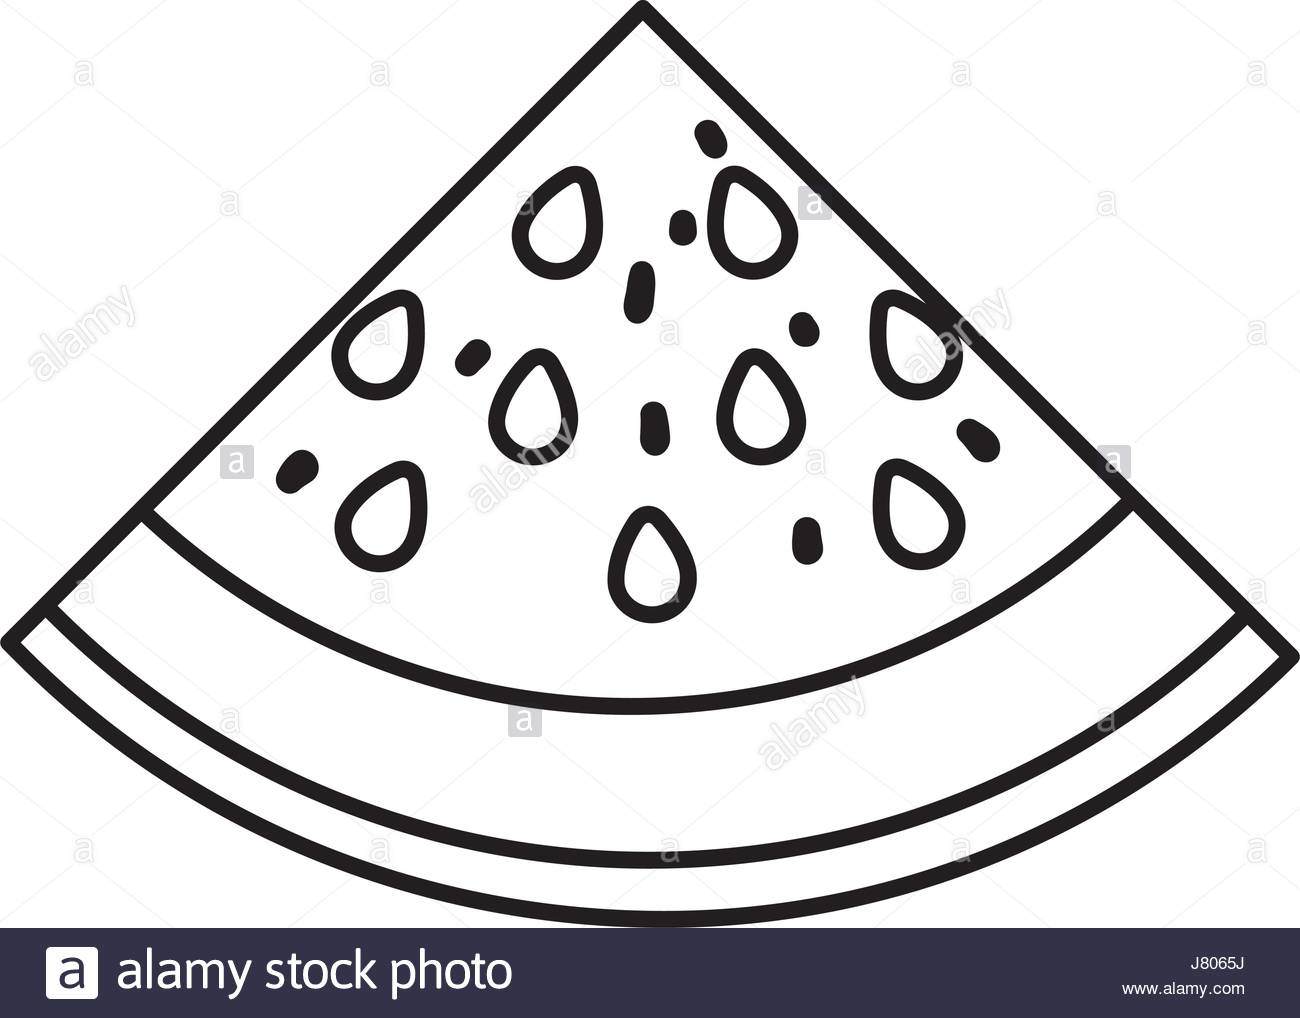 Collection of Watermelon slice clipart